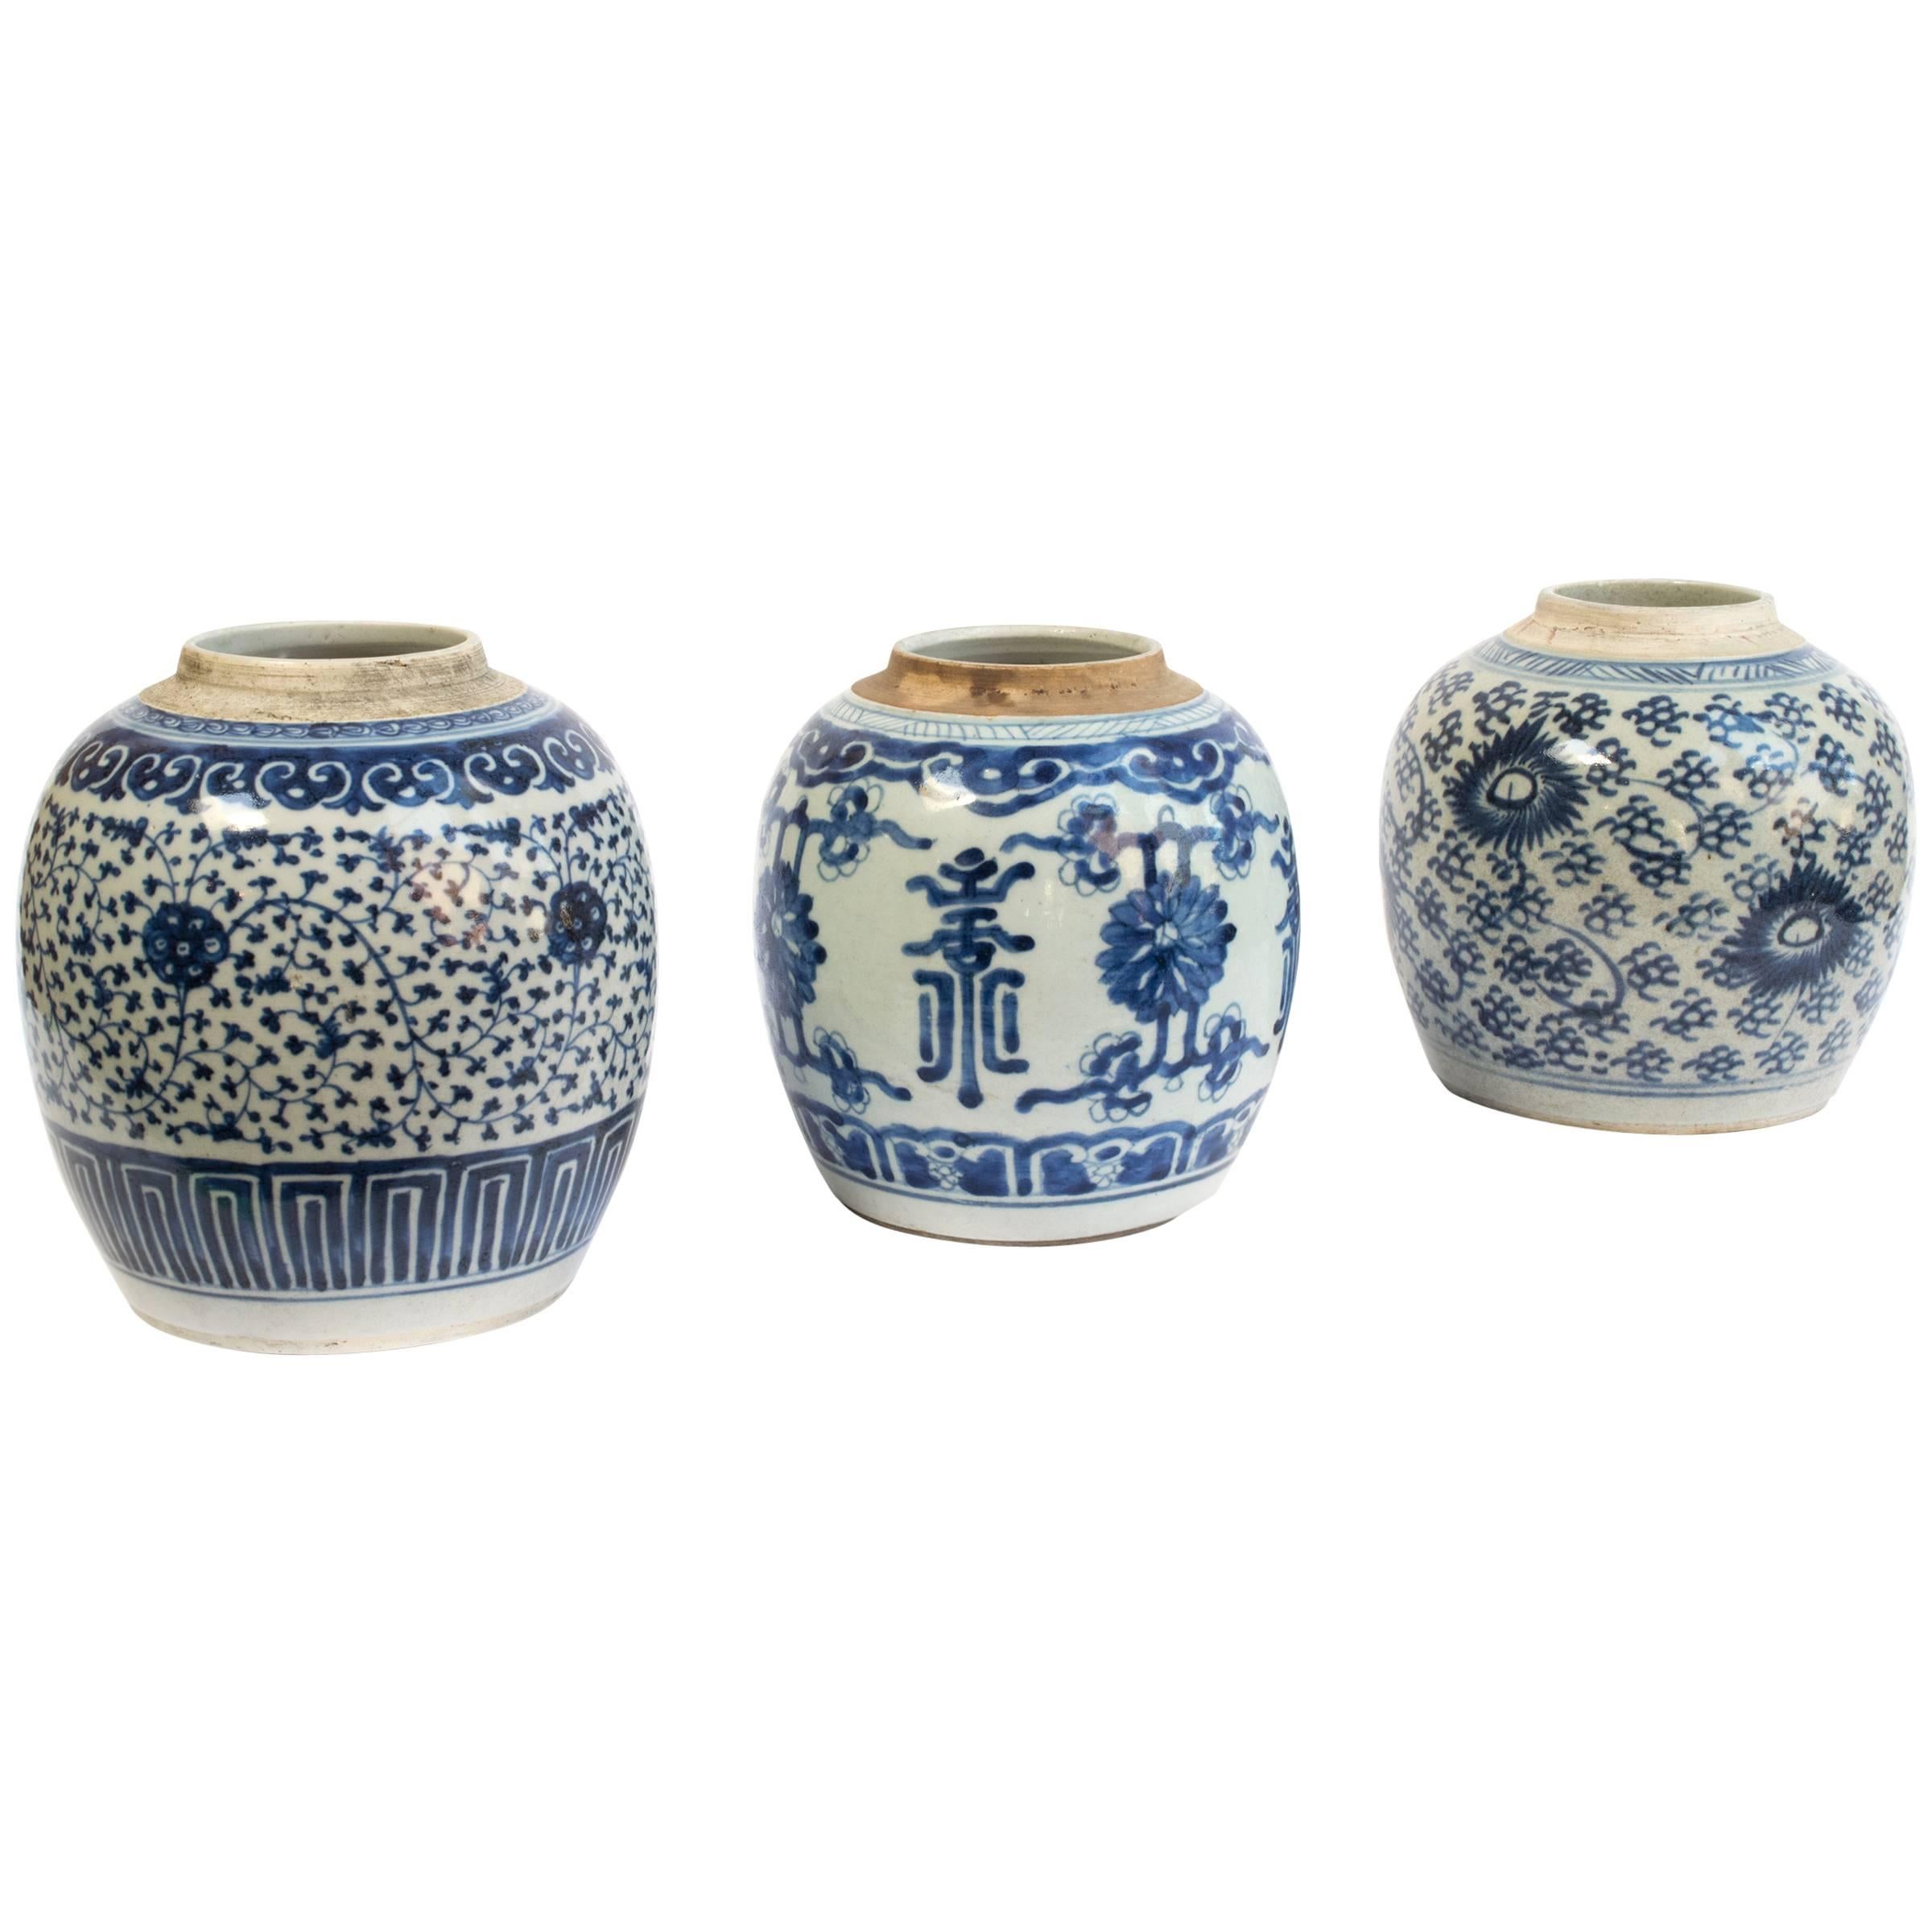 Set of Three 19th Century Chinese Blue and White Porcelain Jars, Southern China